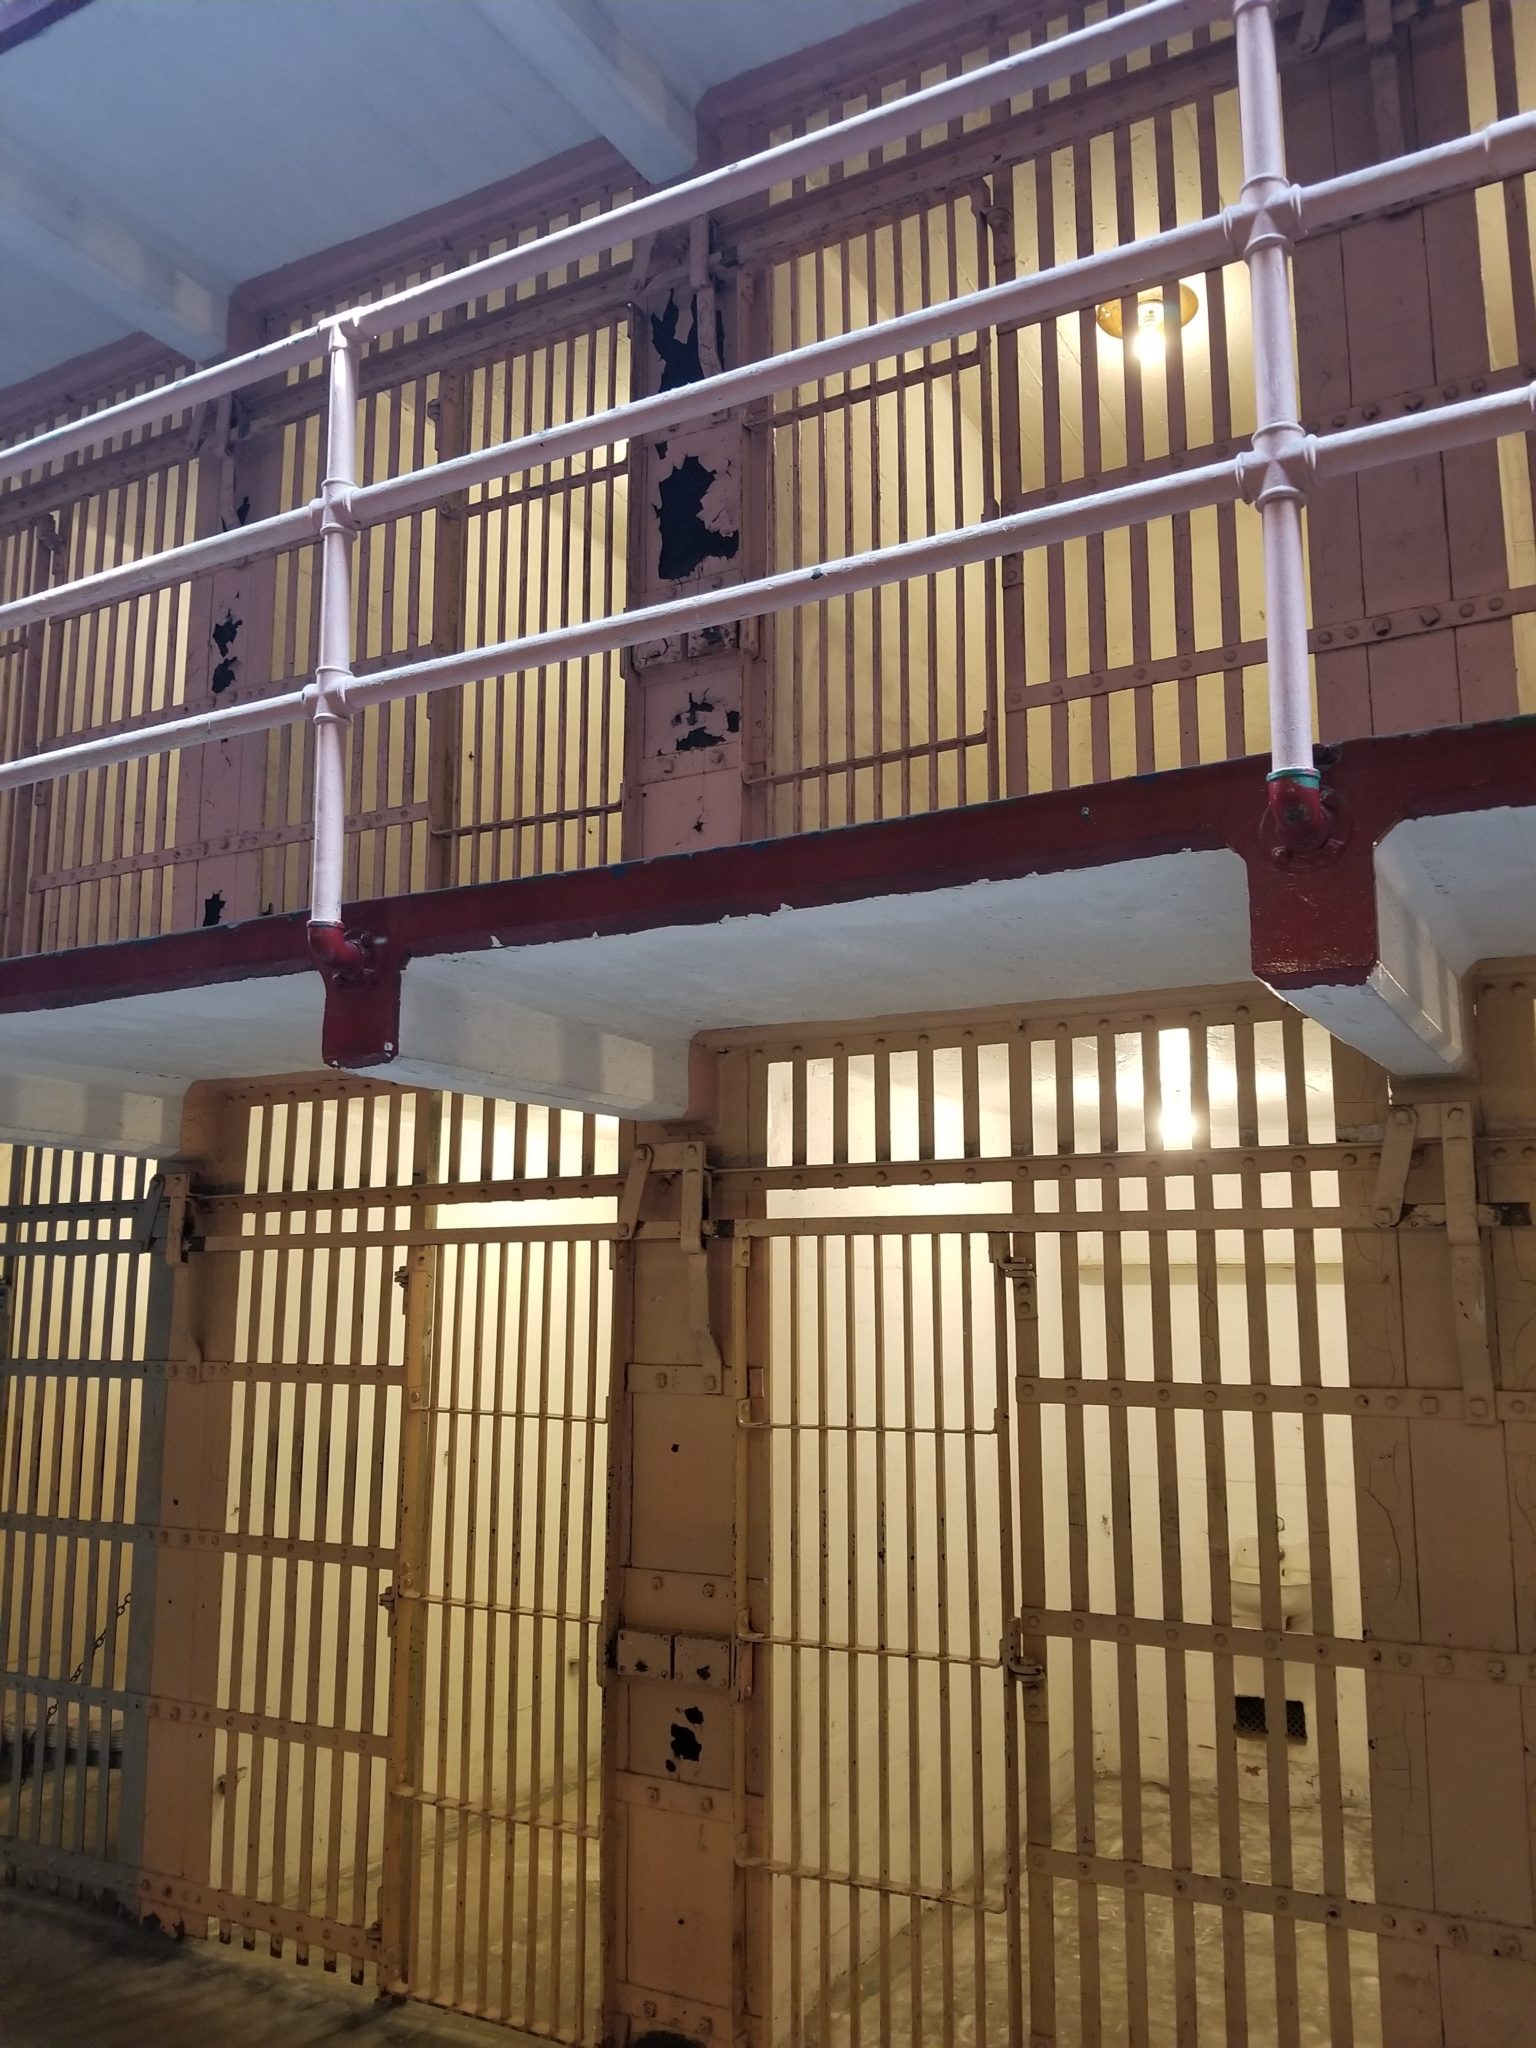 a prison cell with a balcony and railing